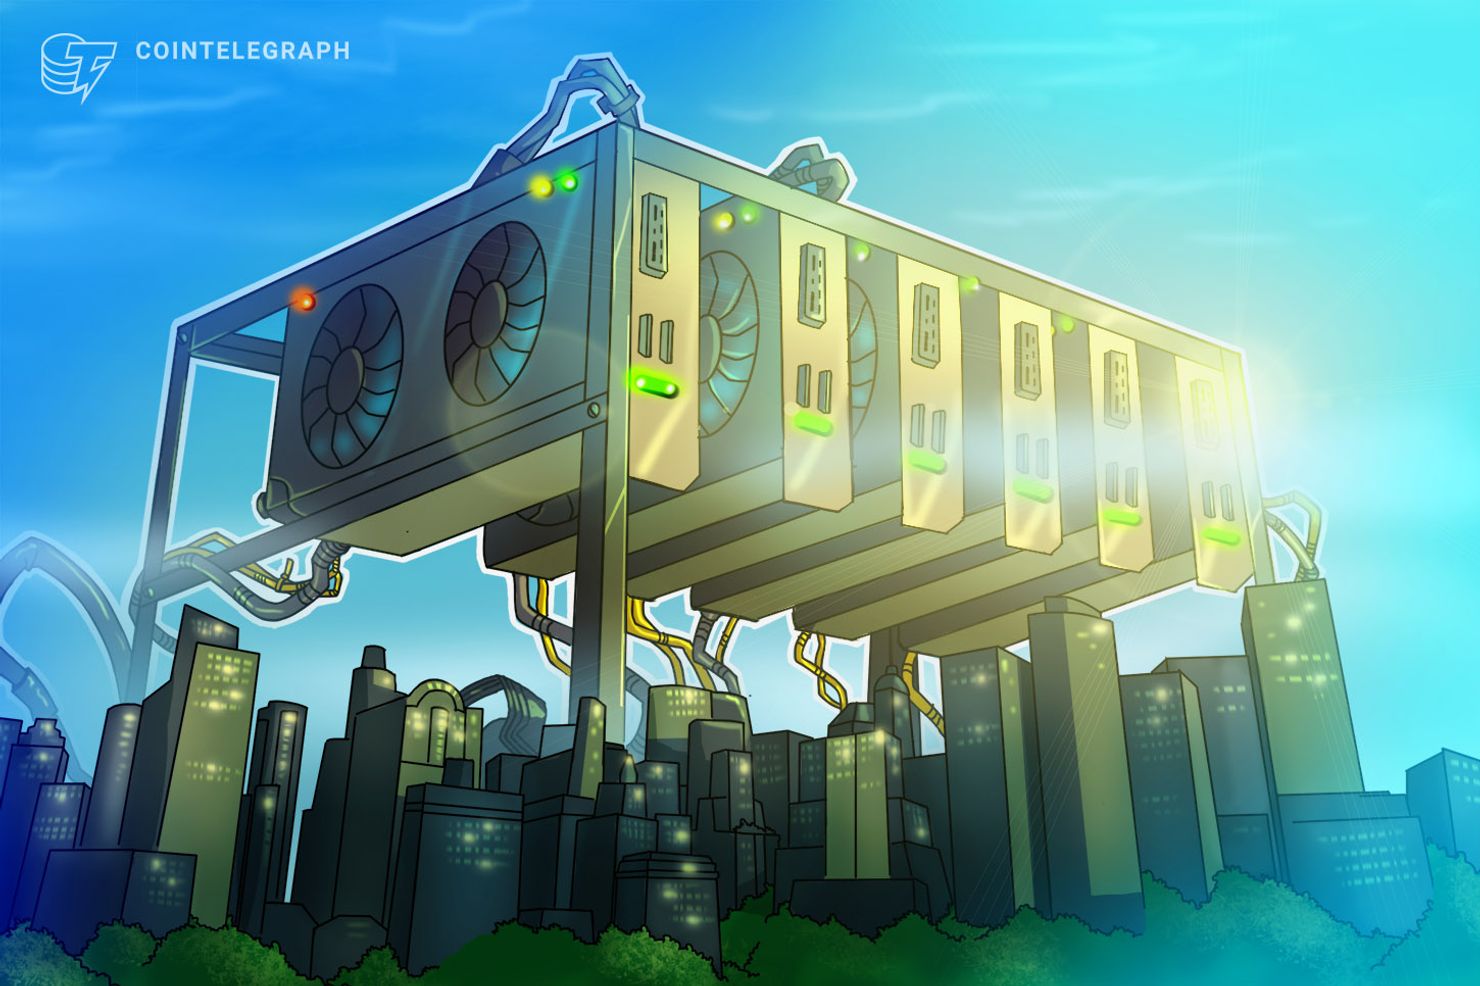 Photo by Cointelegraph.com